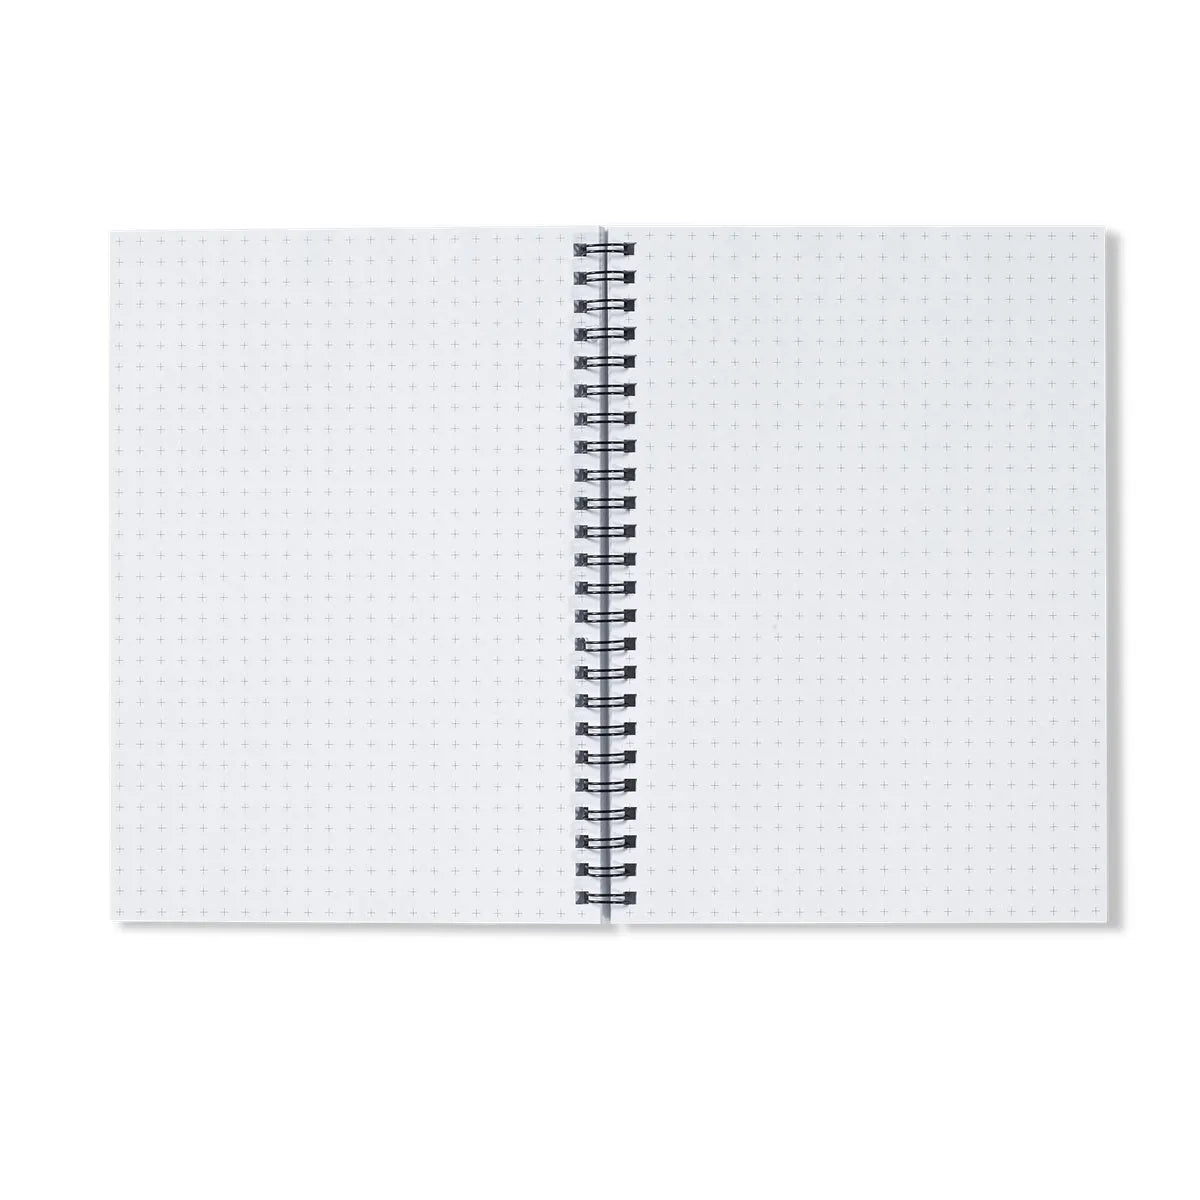 Centre Stage Notebook - Notebooks & Notepads - Aesthetic Art